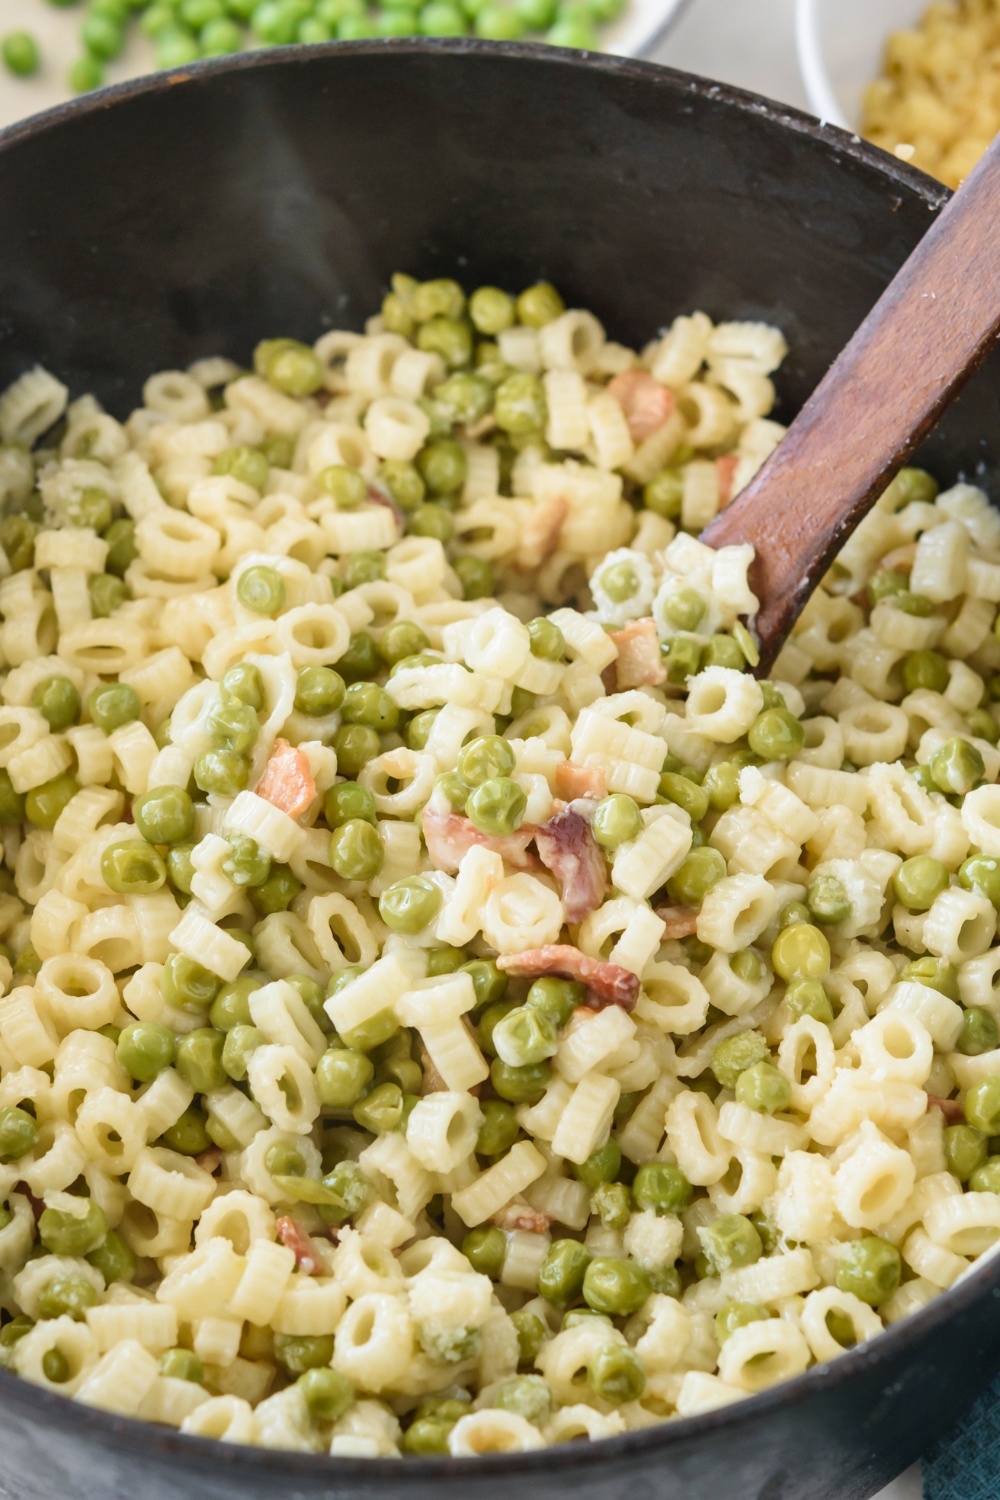 Pasta with peas mixed in a pot with a wooden spoon submerged in it.